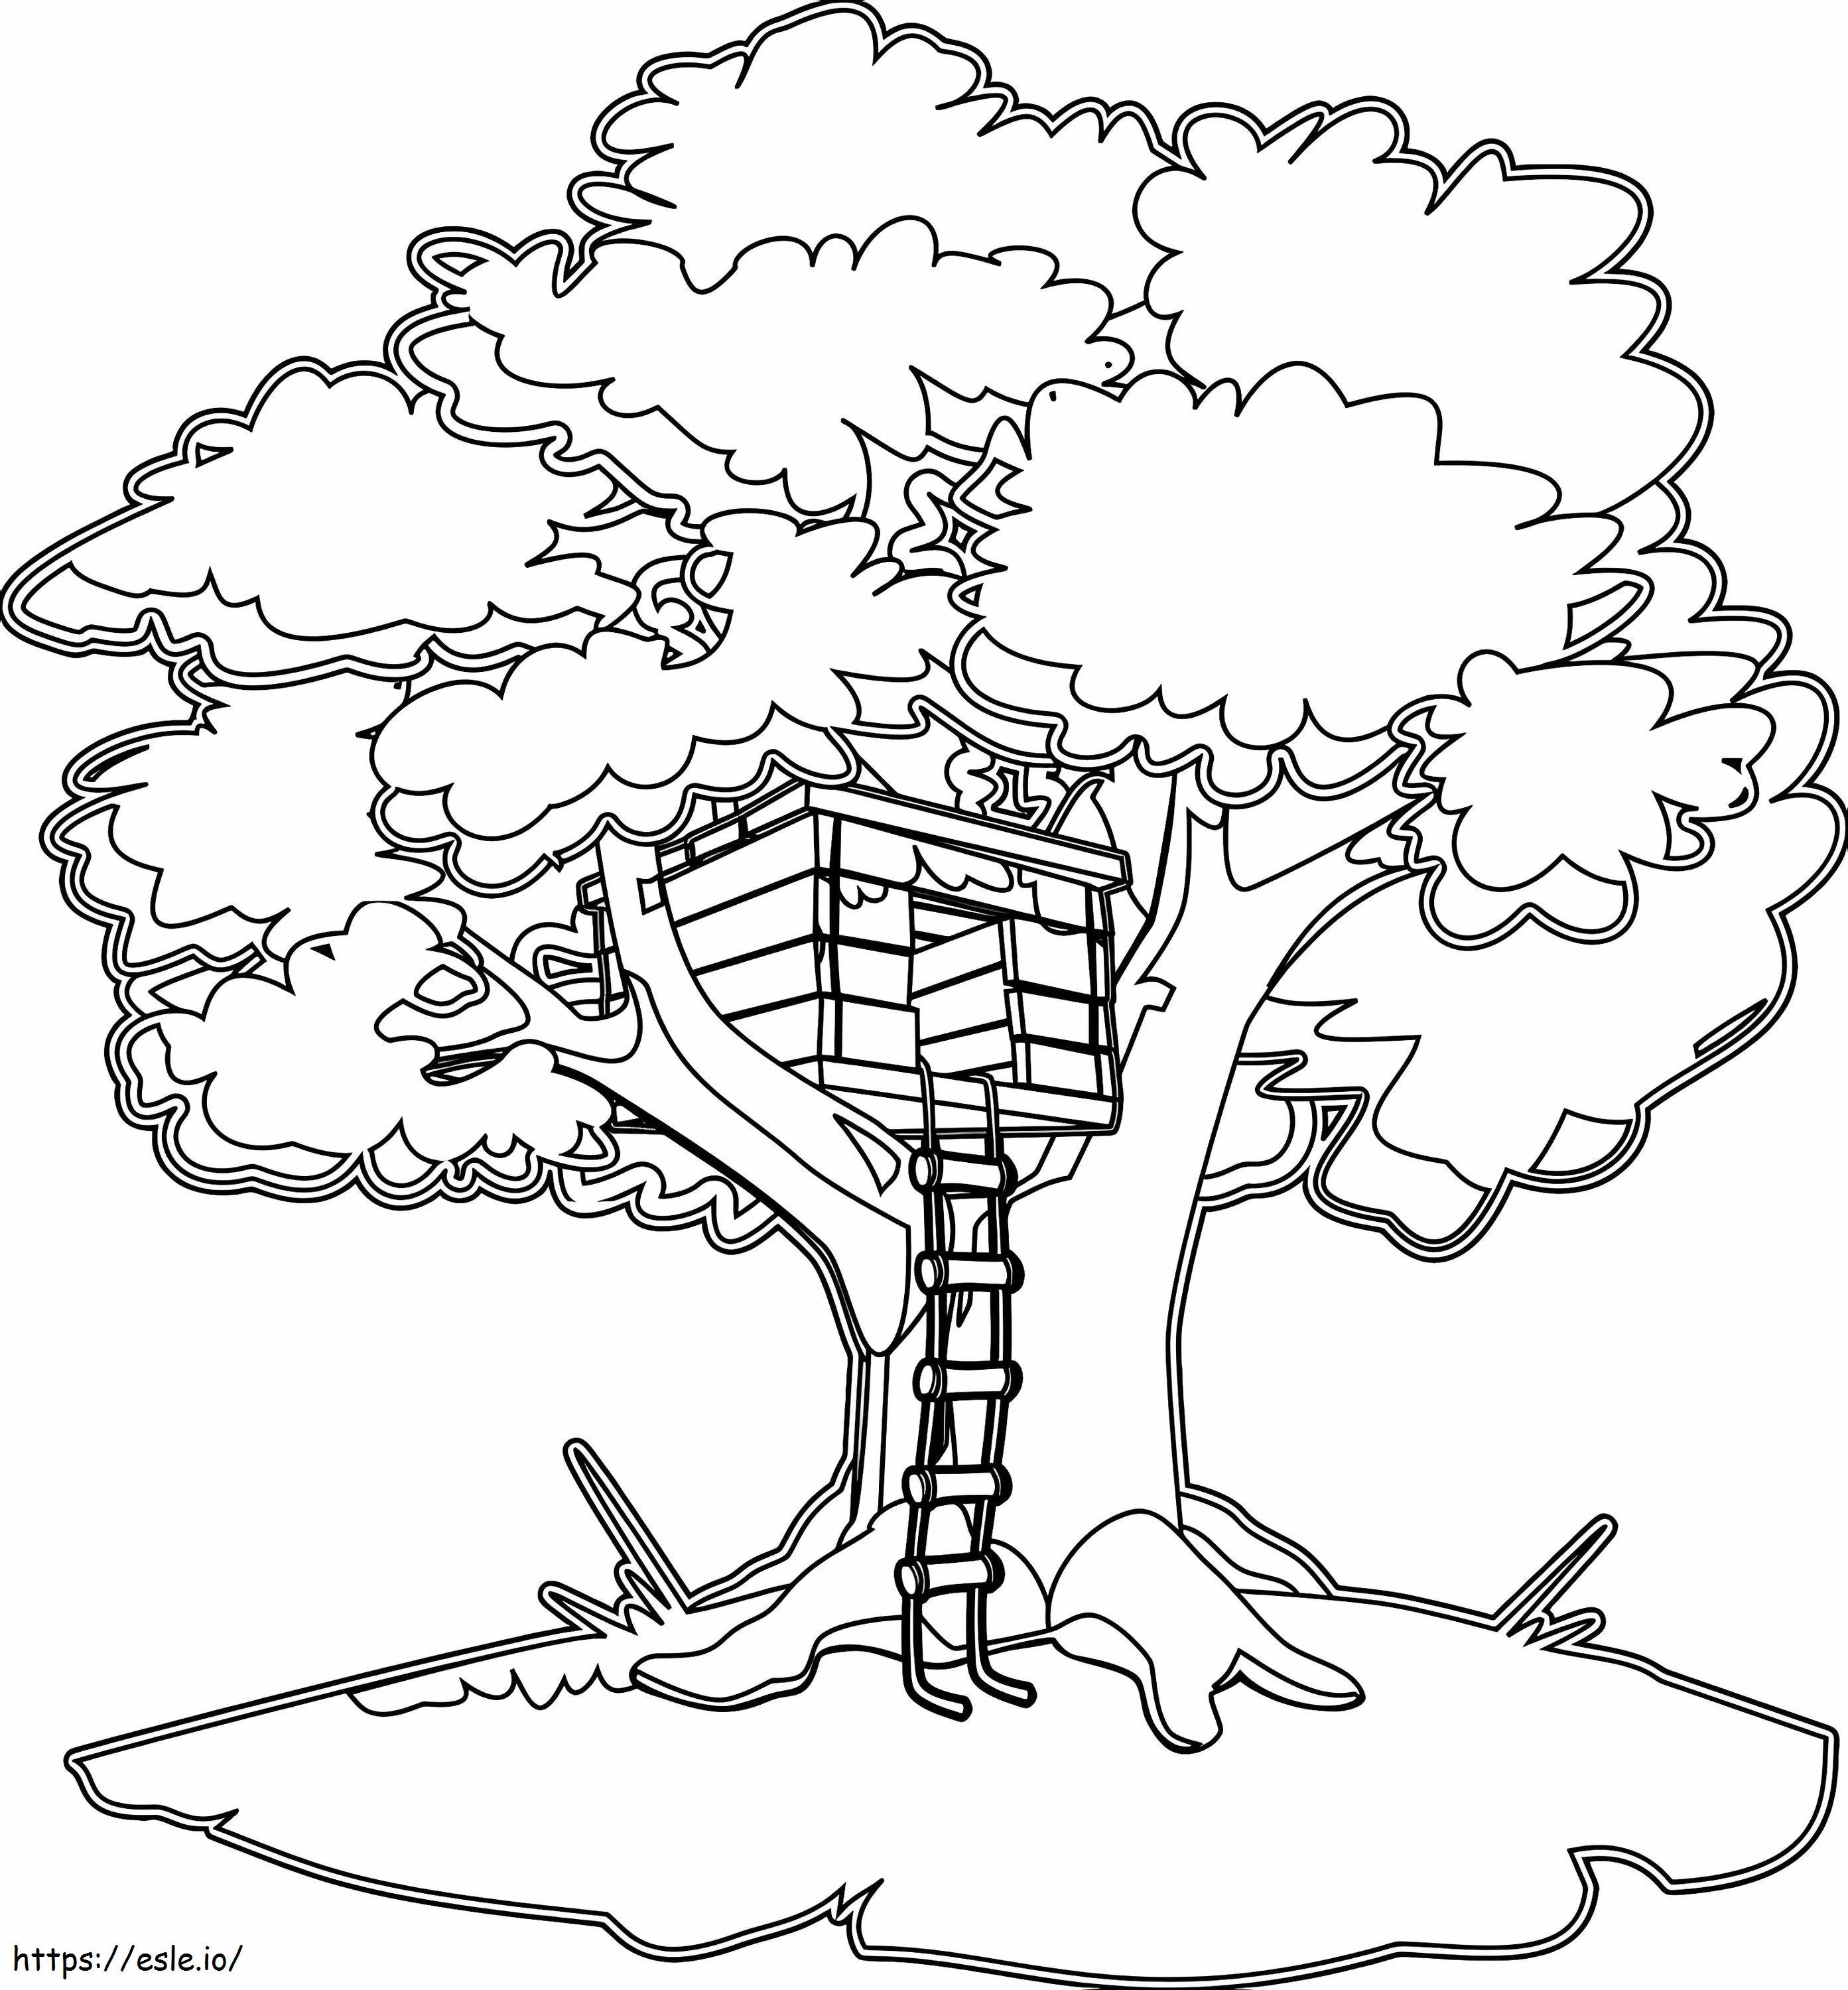 Treehouse Ladder coloring page